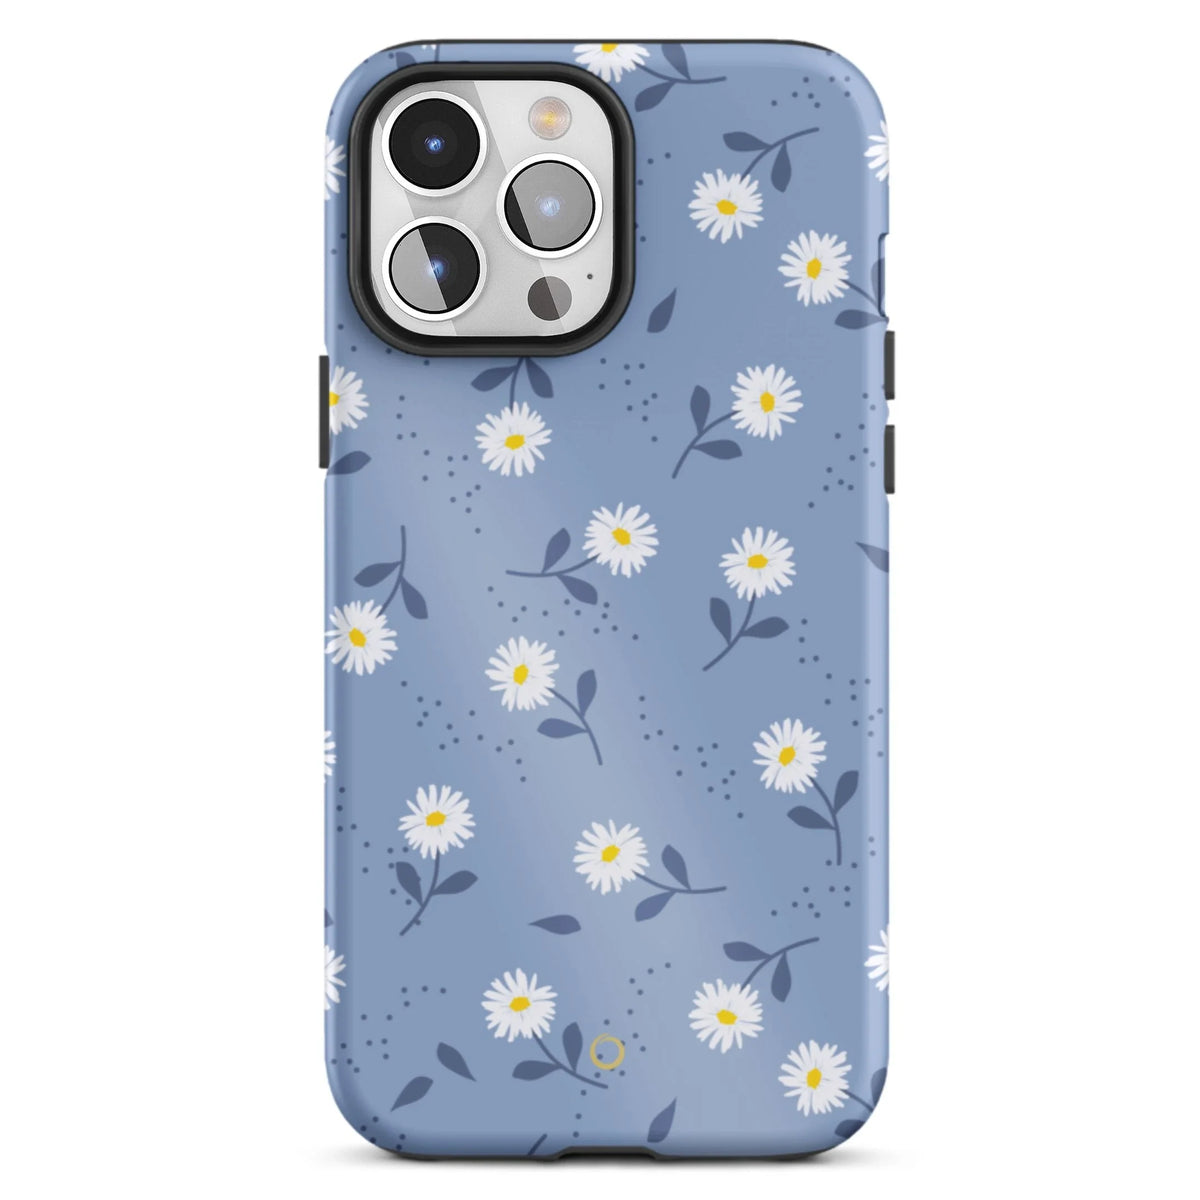 Daisy Dream iPhone Case - Select a Device